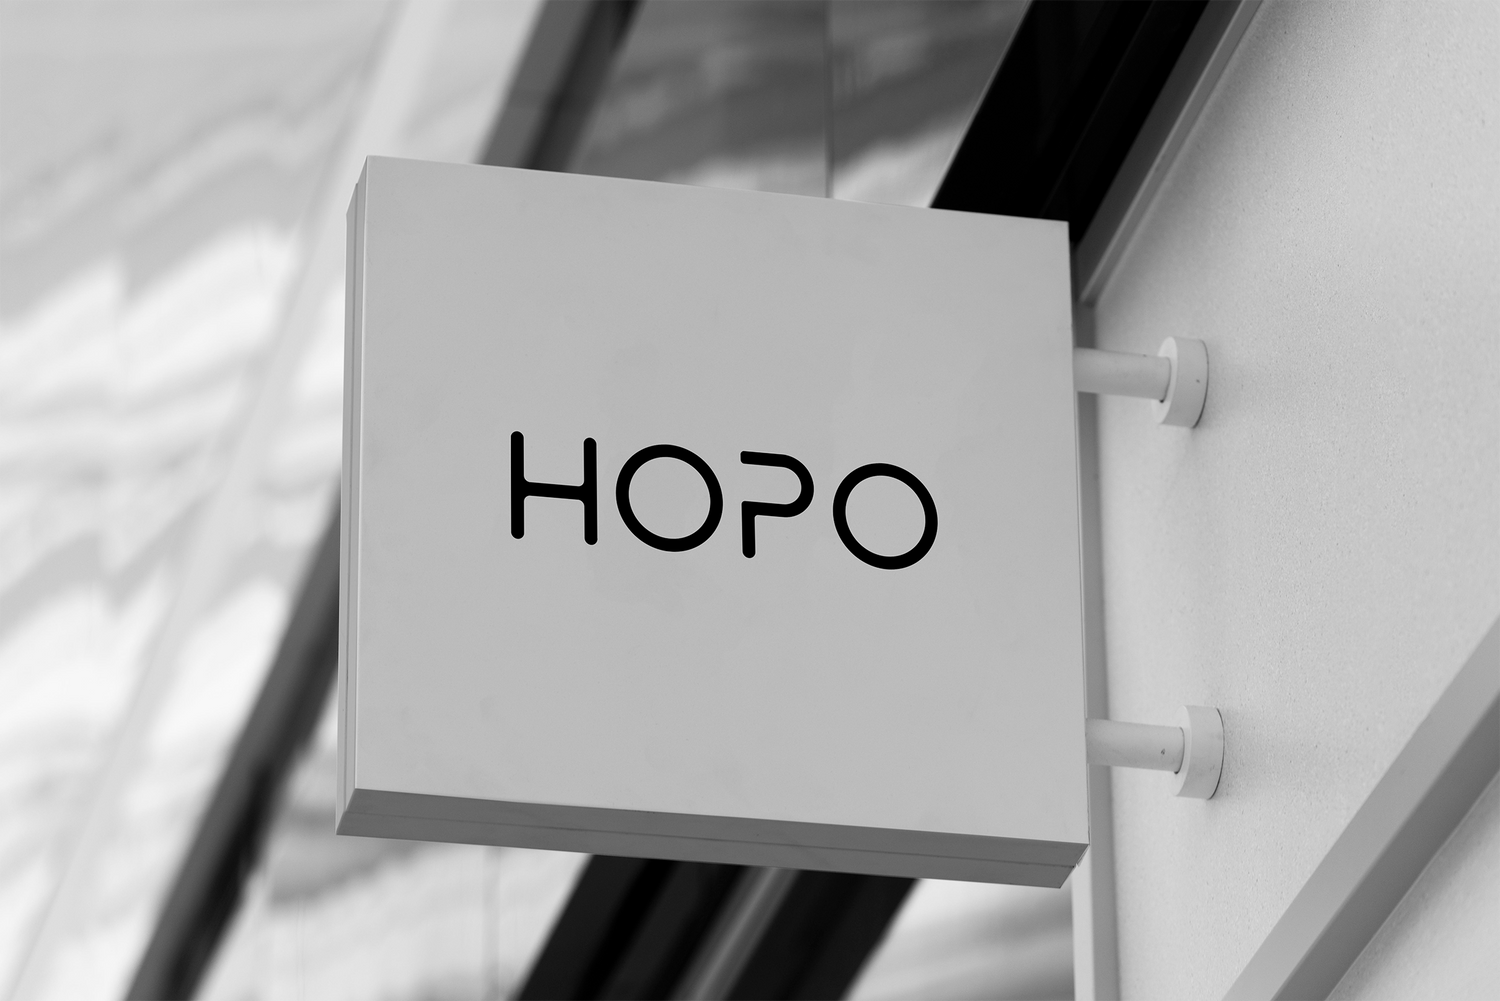 HOPO Won 1.5 Million USD of the A Round of Funding